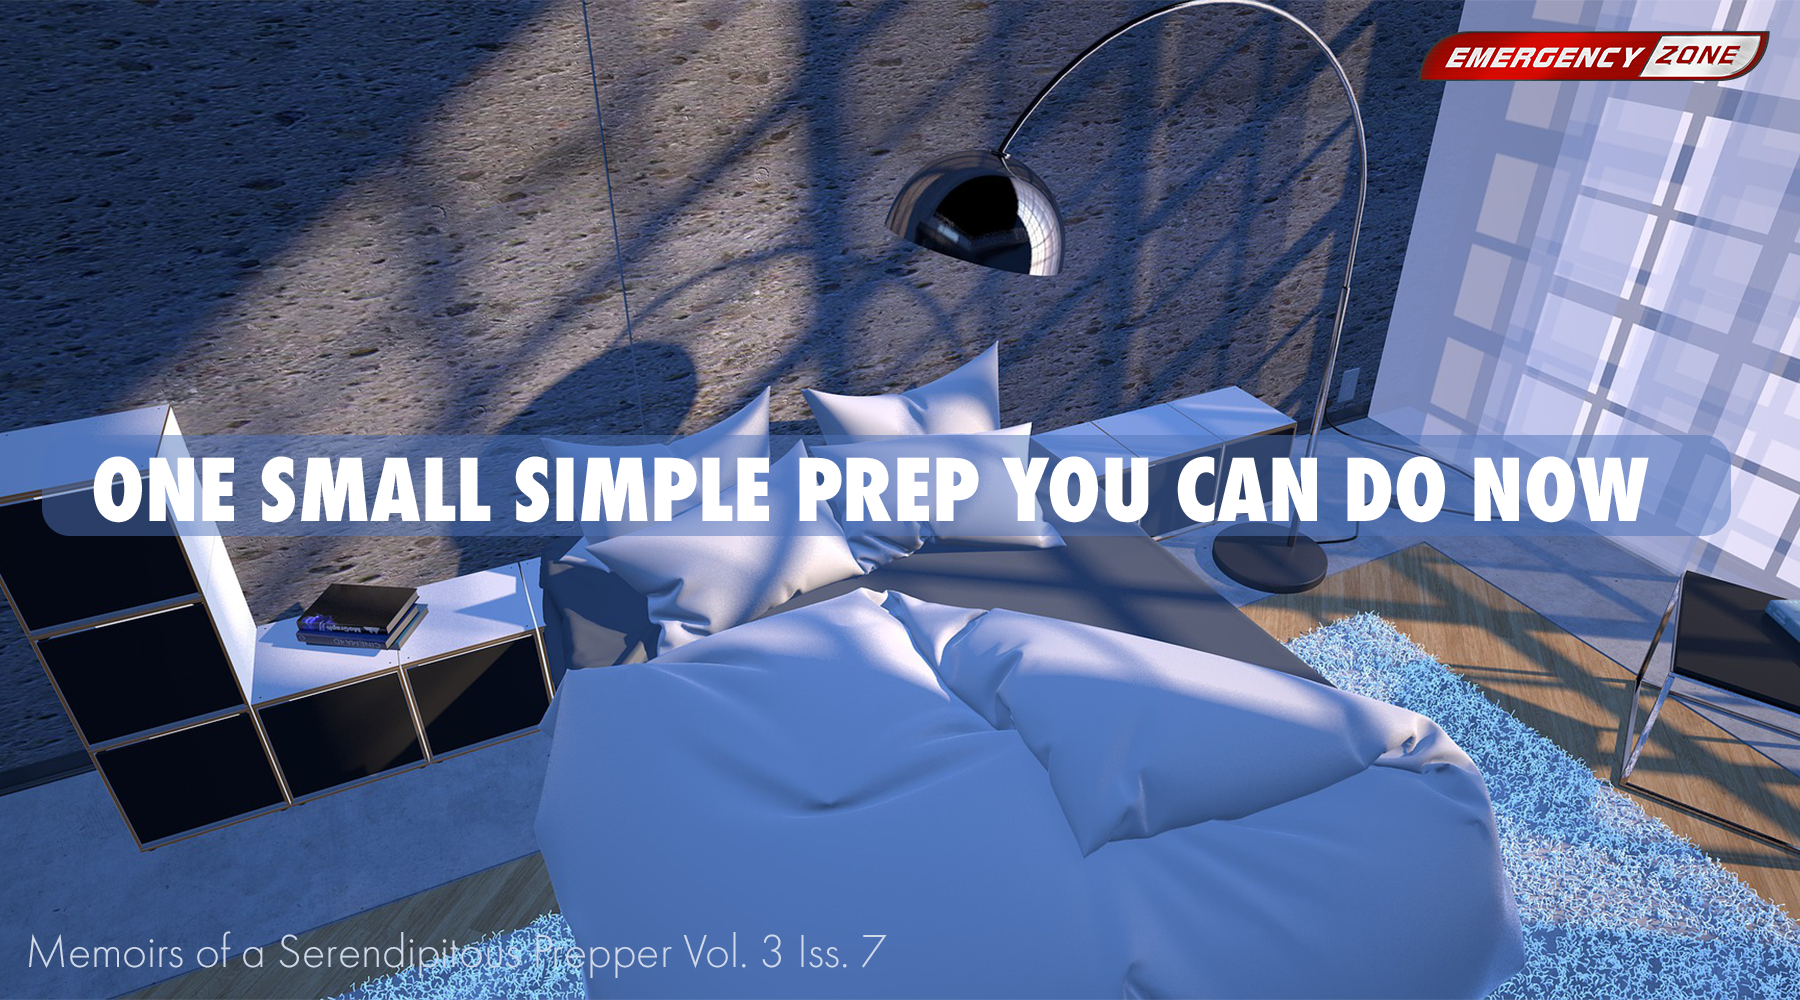 One Small Prep You Can Do Now